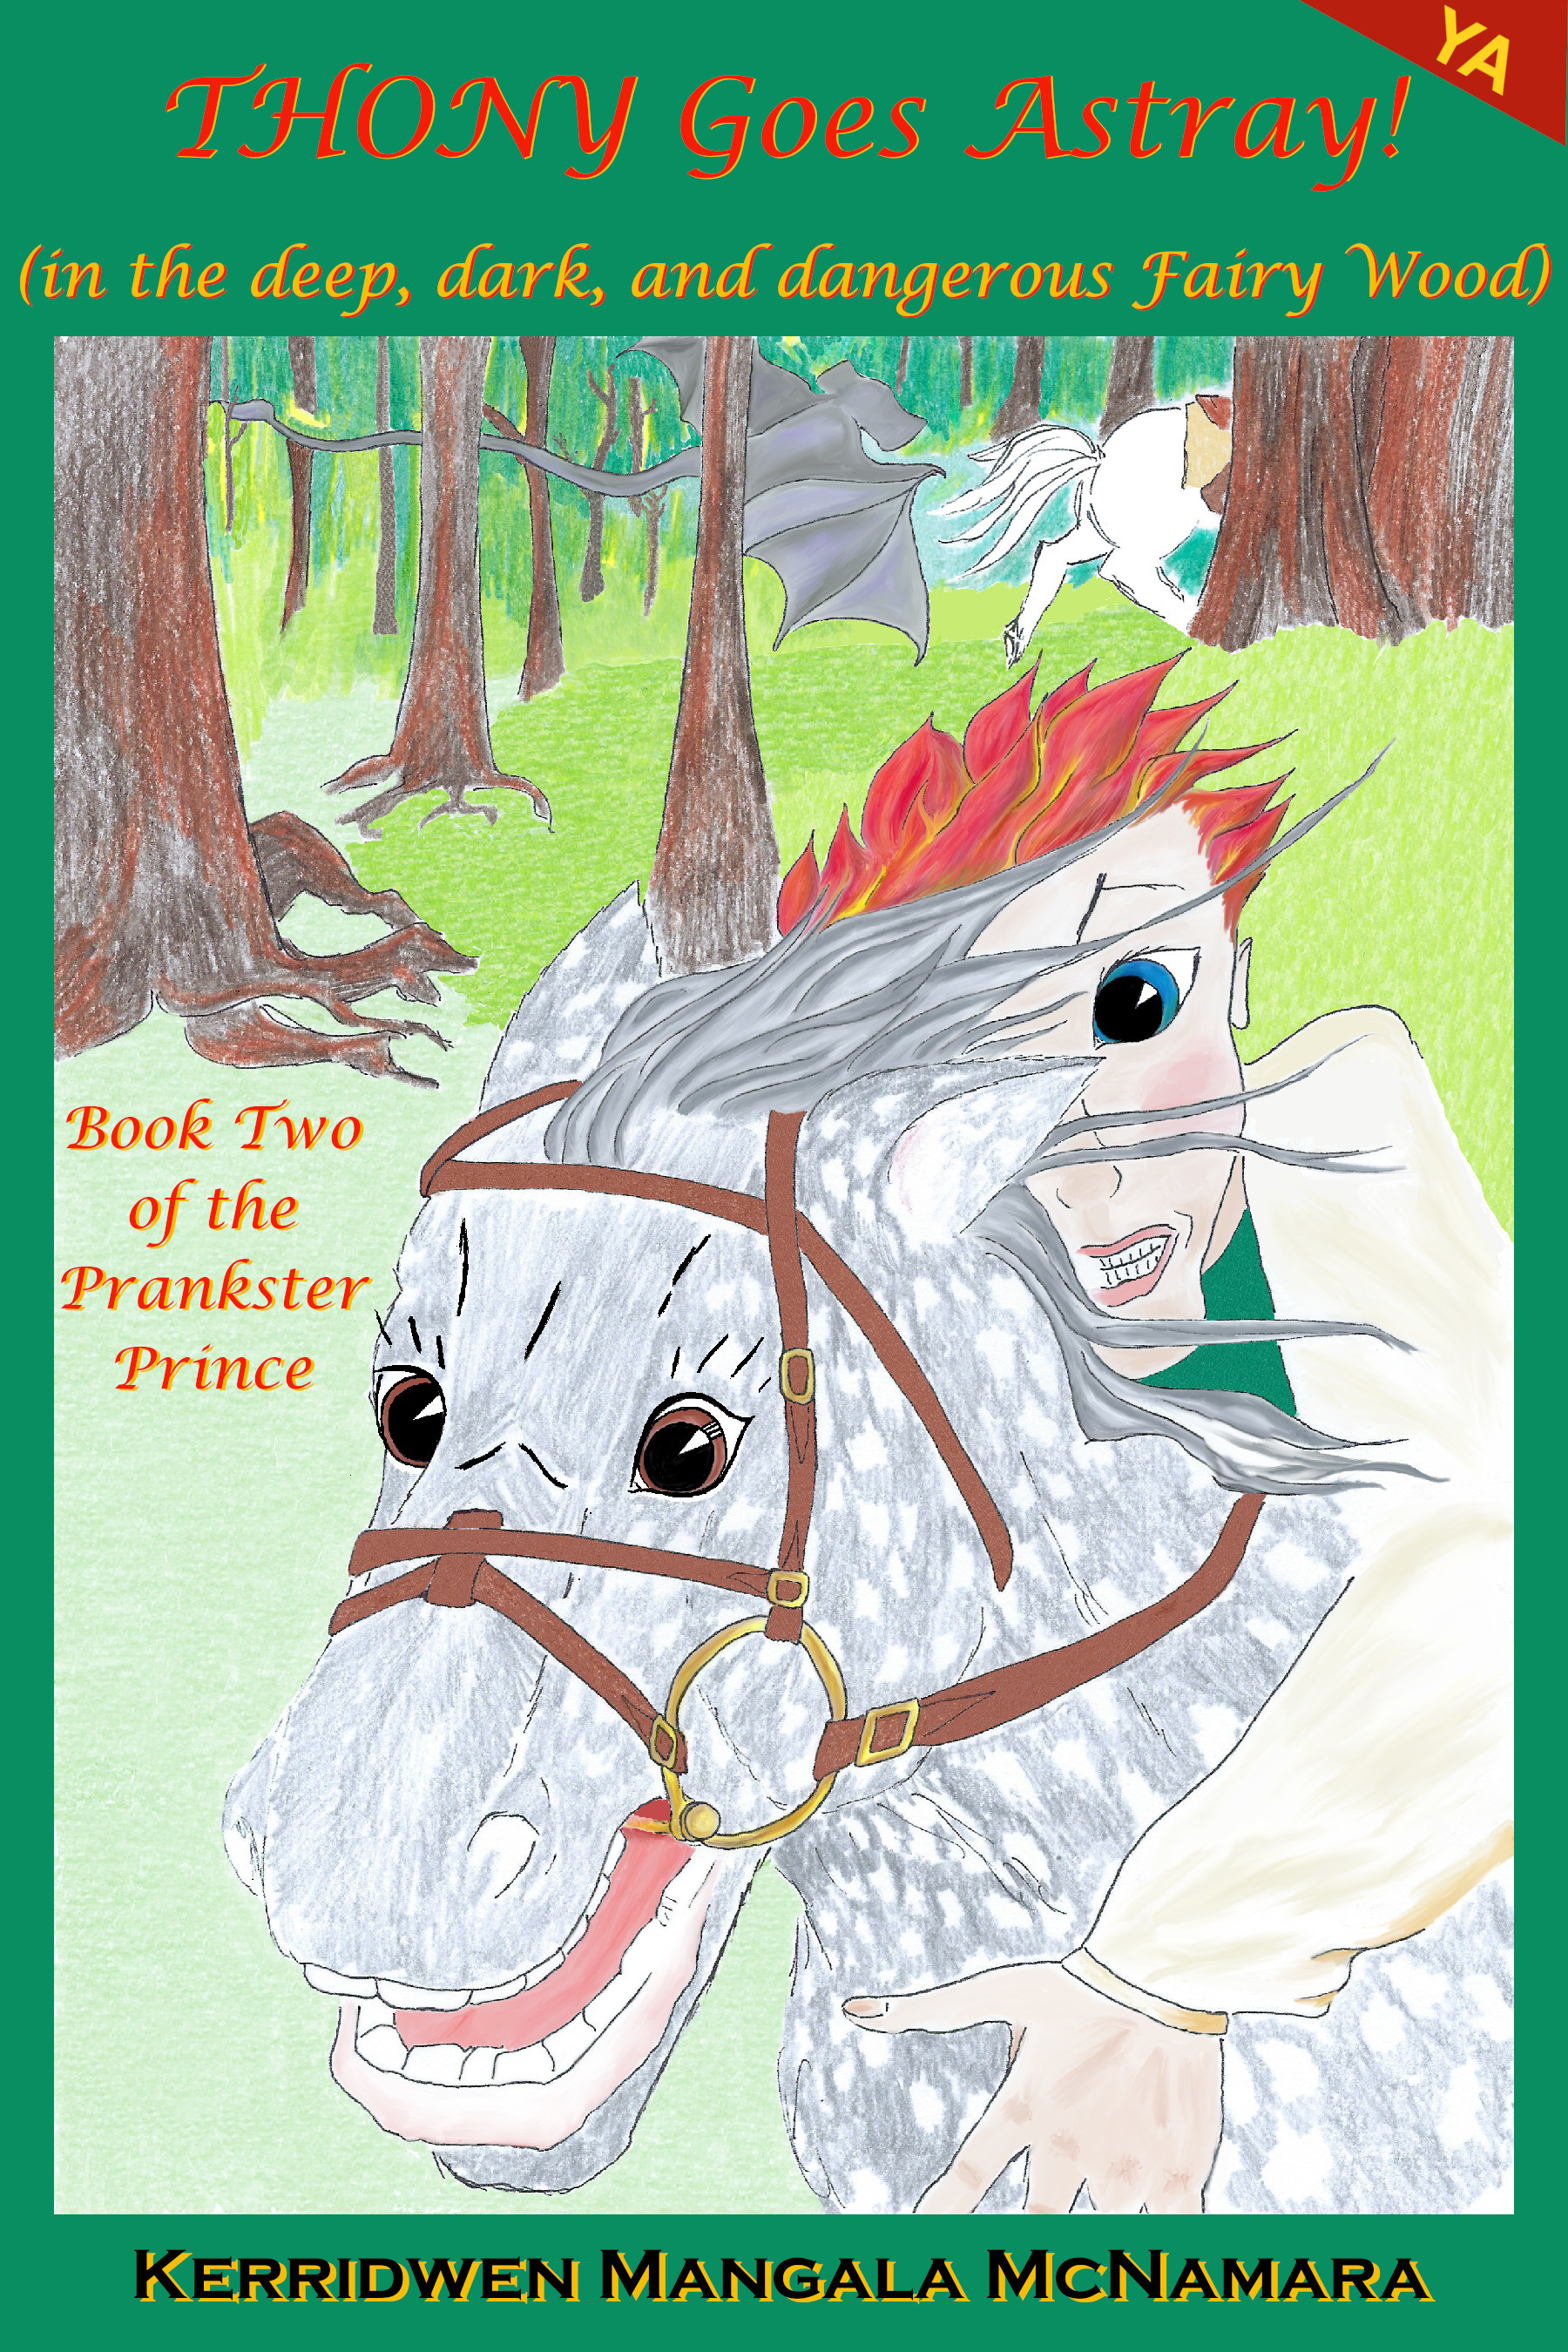 Cover for book: Thony Goes Astray! (in the Deep, Dark, and Dangerous Fairy Wood), Book Two of the Prankster Prince